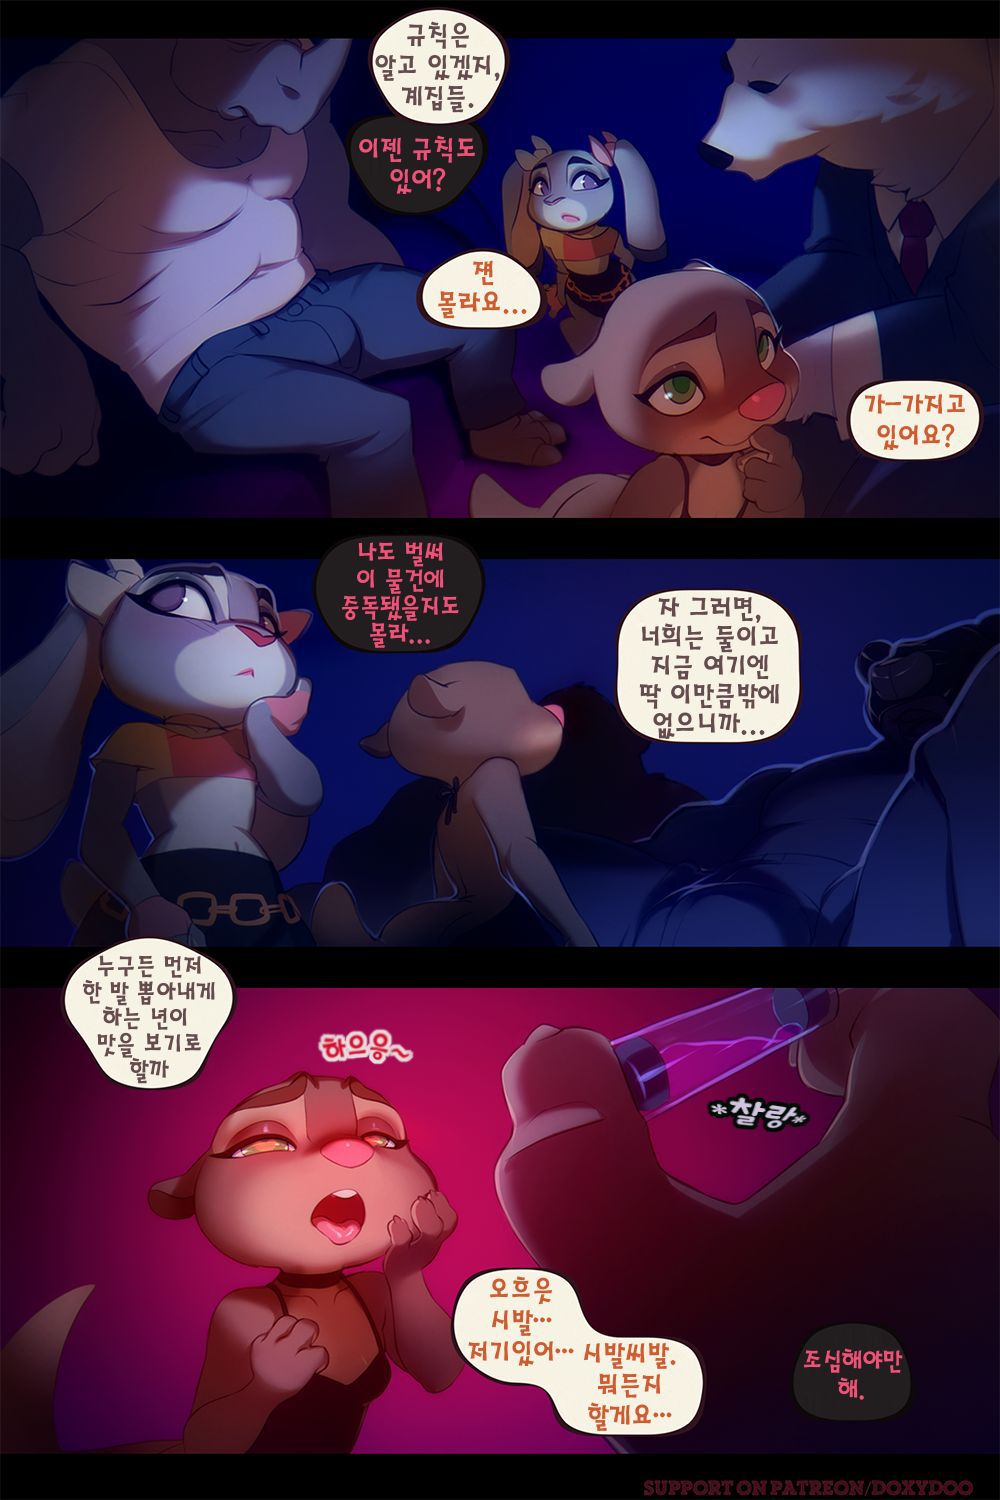 [Doxy] Sweet Sting Part 2: Down The Rabbit Hole | 달콤한 함정수사 2부: 토끼 굴속으로 (Zootopia) [Korean] [Ongoing] 10